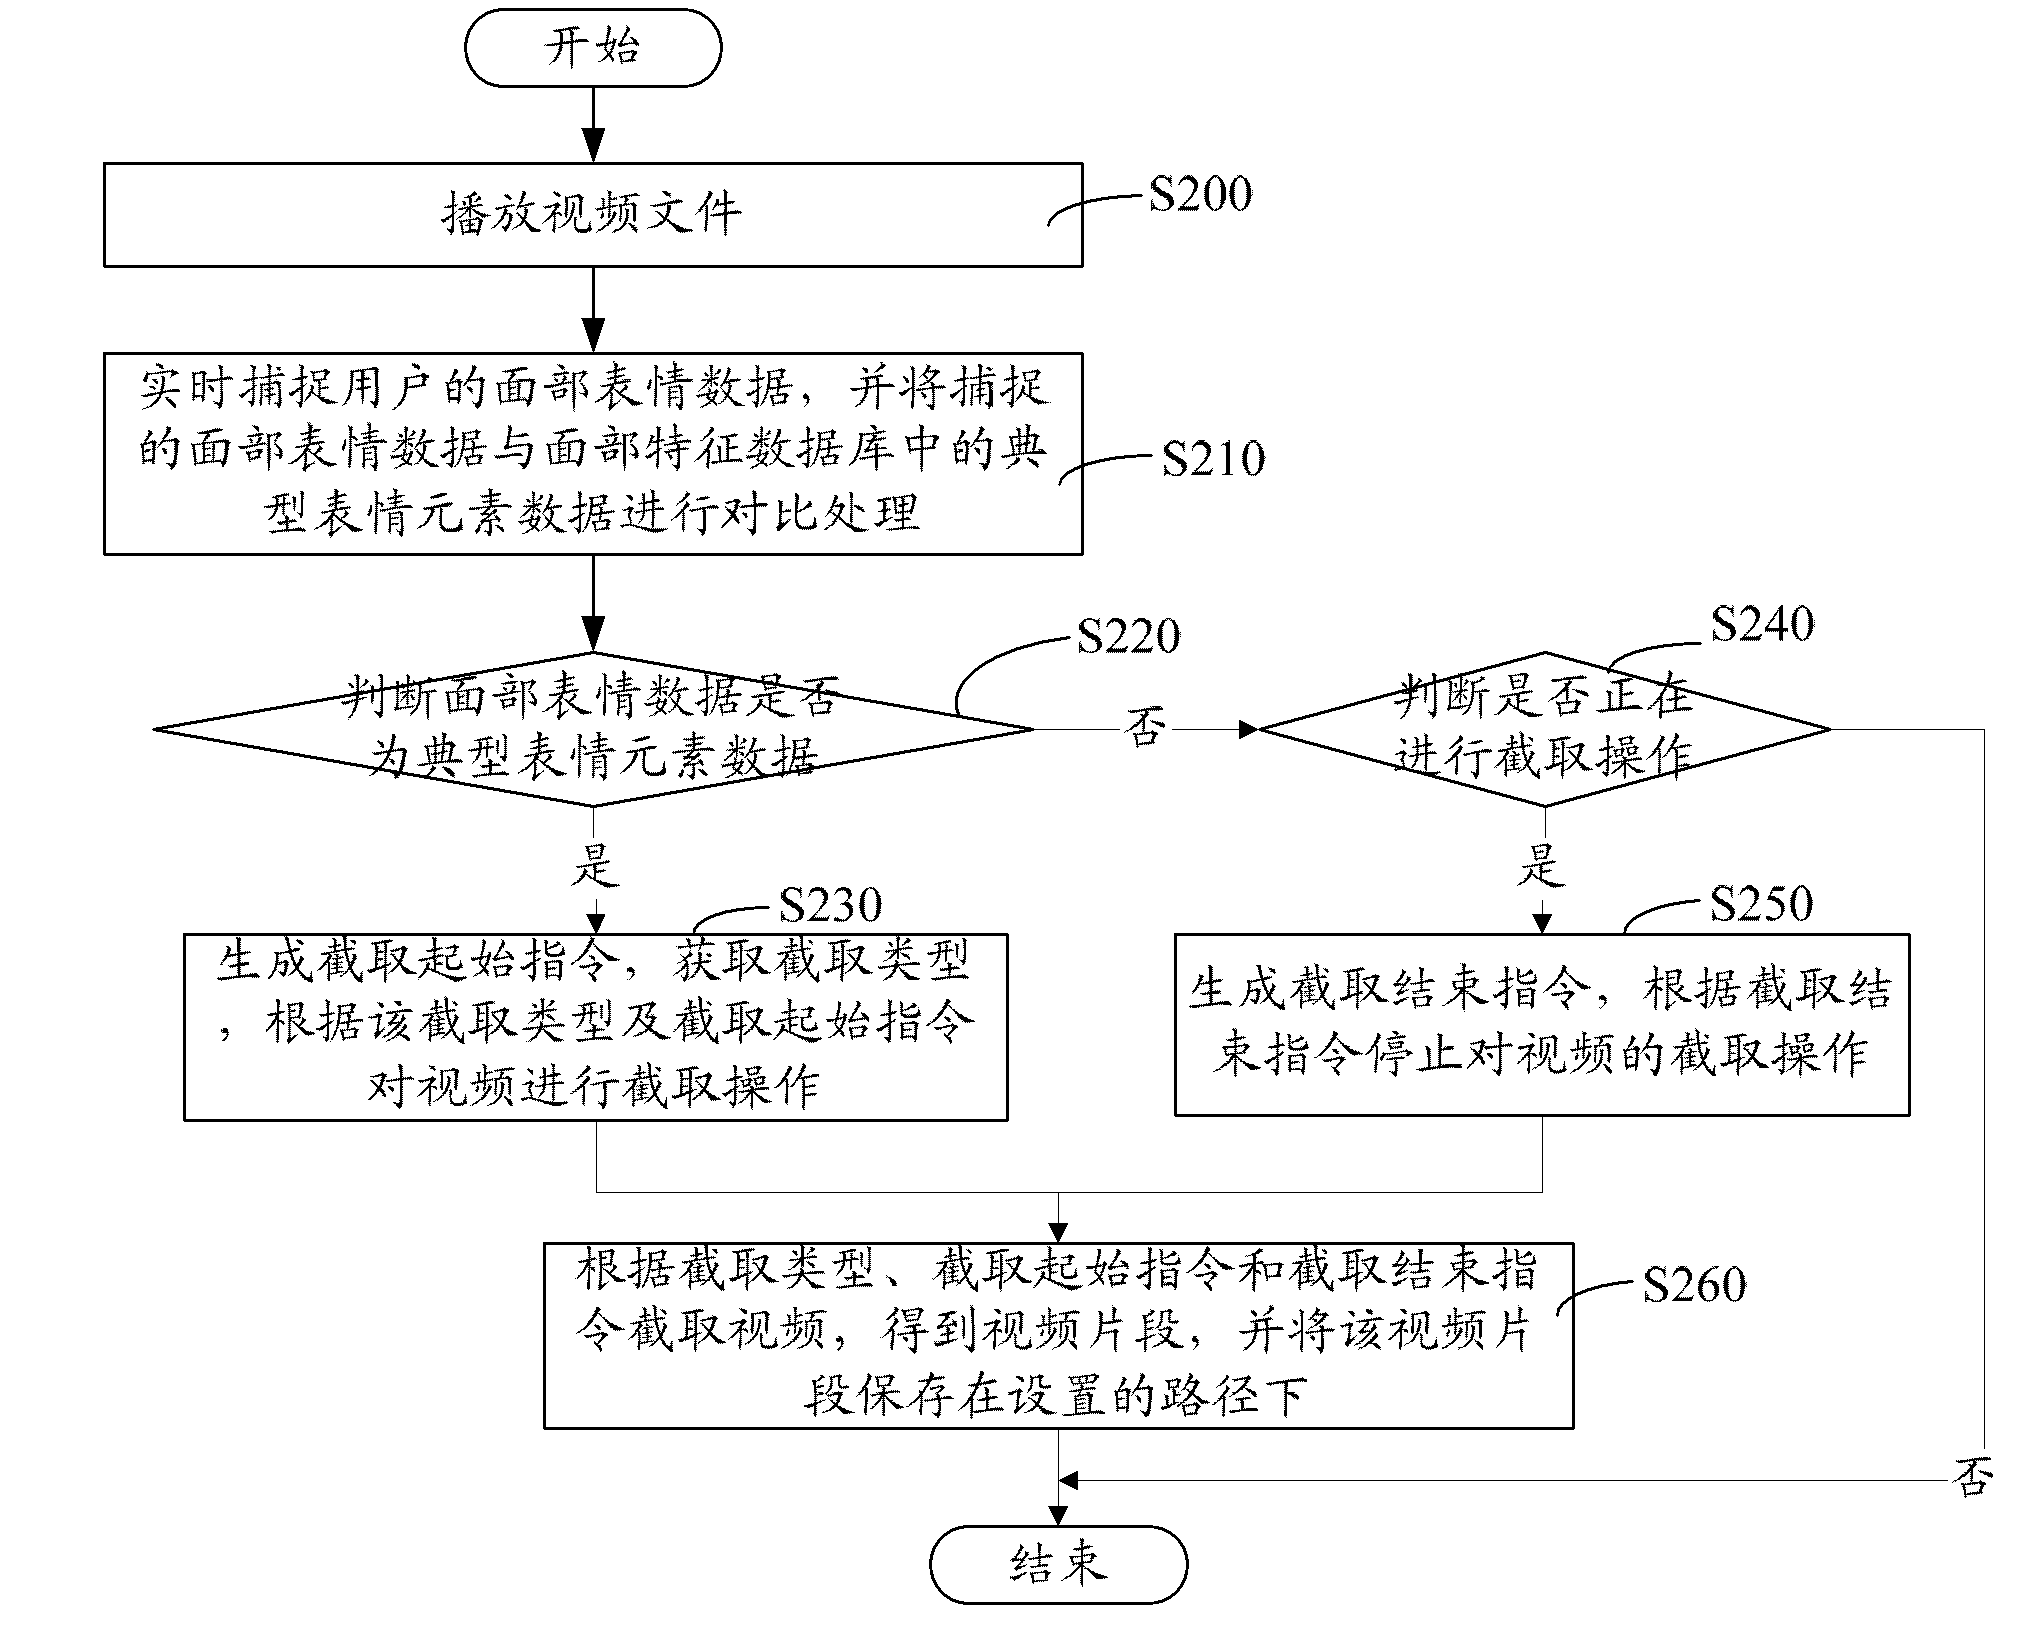 Method and system for video clip generation